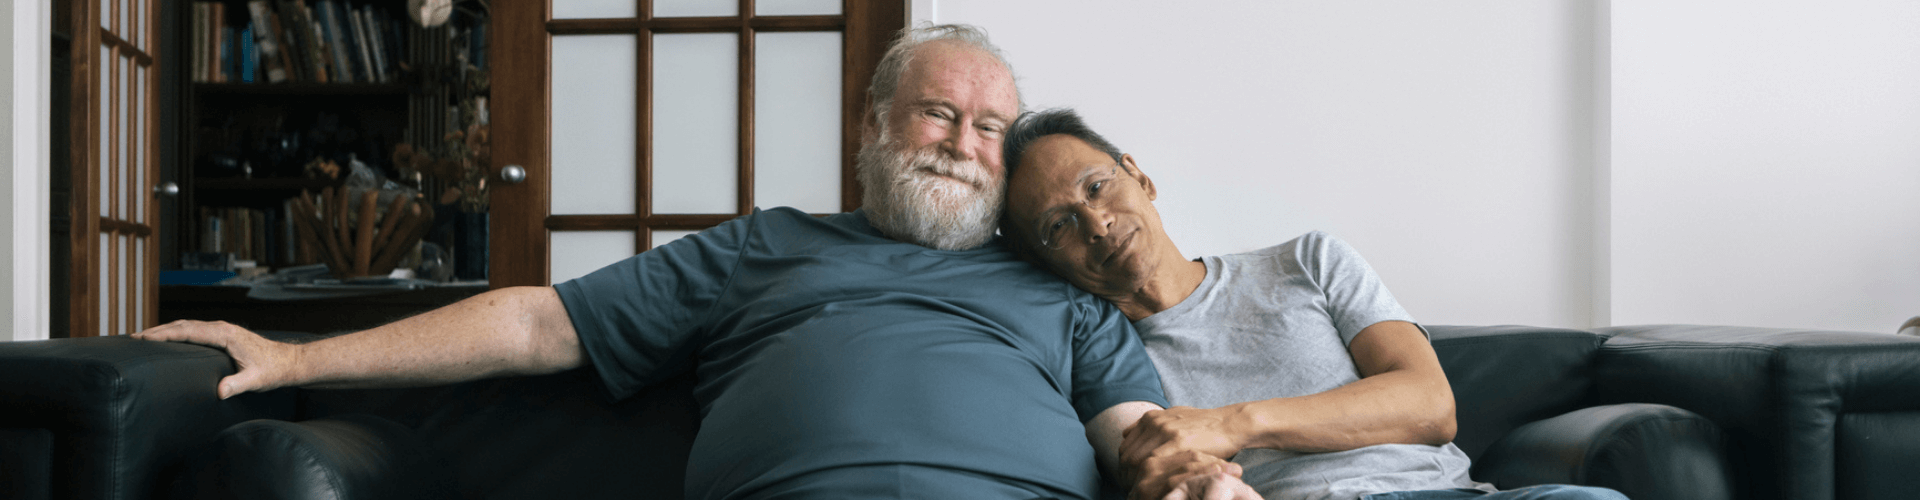 Two older people embrace on a sofa in a living room